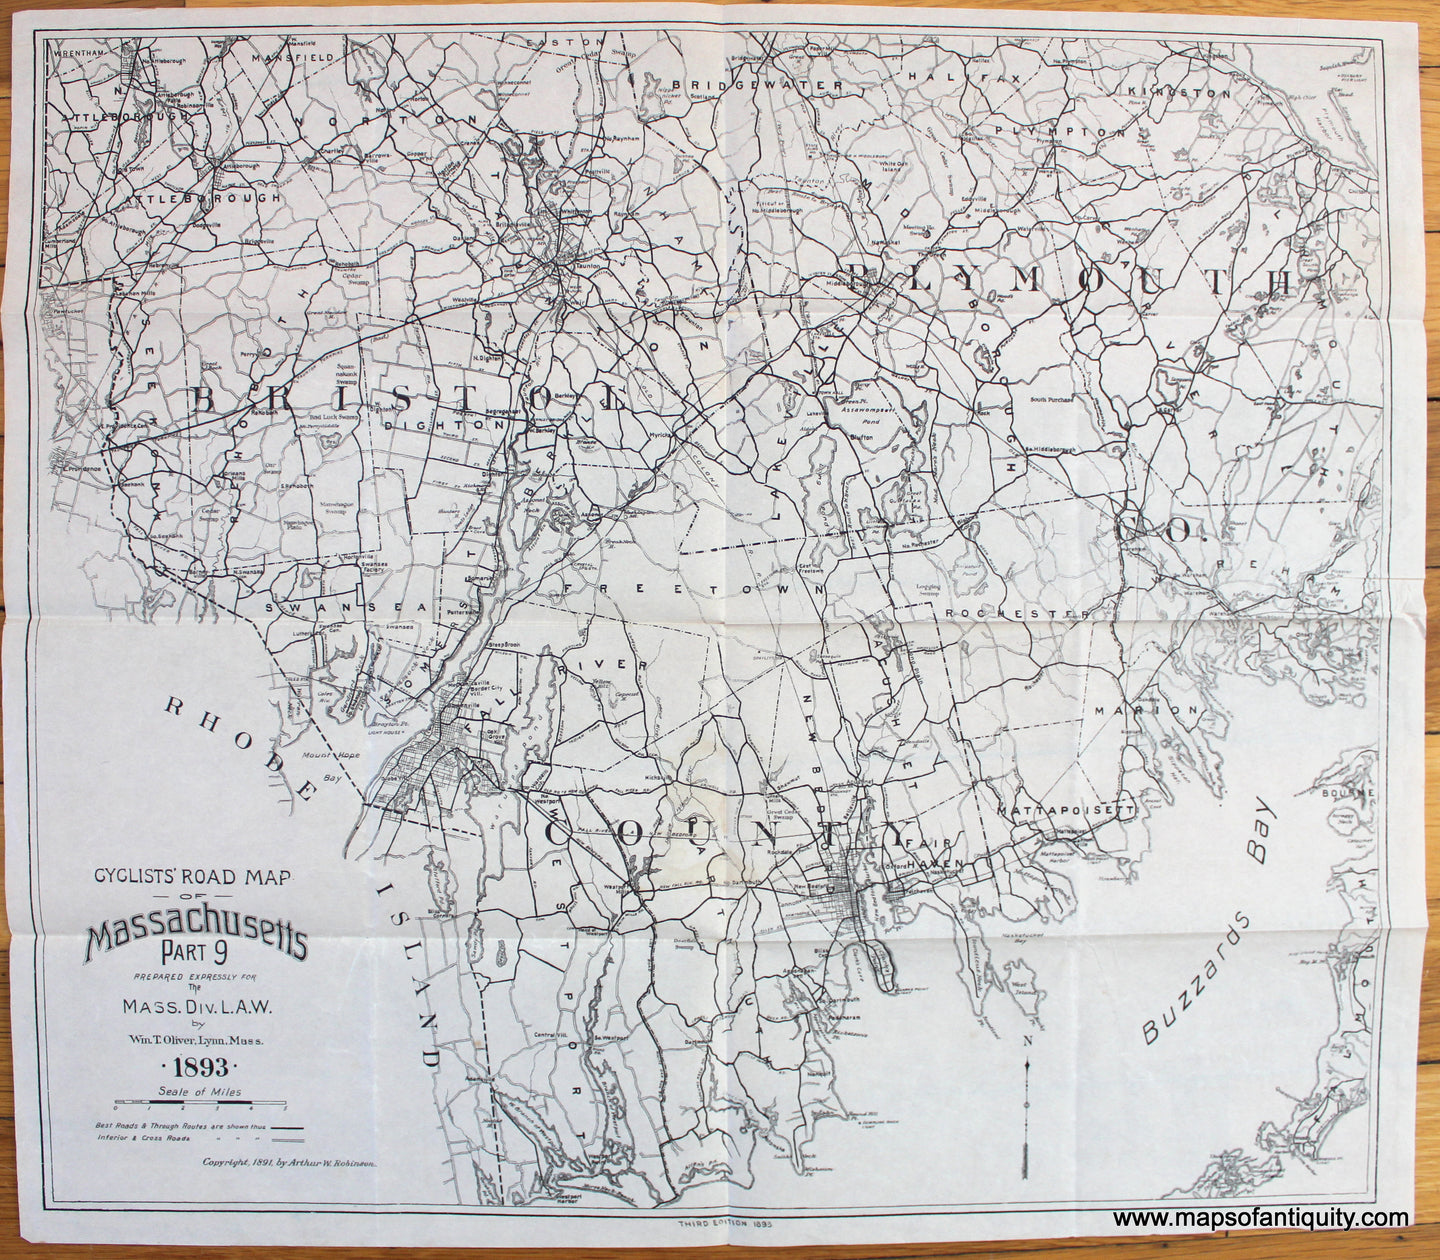 Antique-Map-Cyclists-Road-Map-of-Massachusetts-Part-9-Bristol-Plymouth-counties-1893-Robinson-Bicycle-Bicyclist-1890s-1800s-19th-century-Maps-of-Antiquity